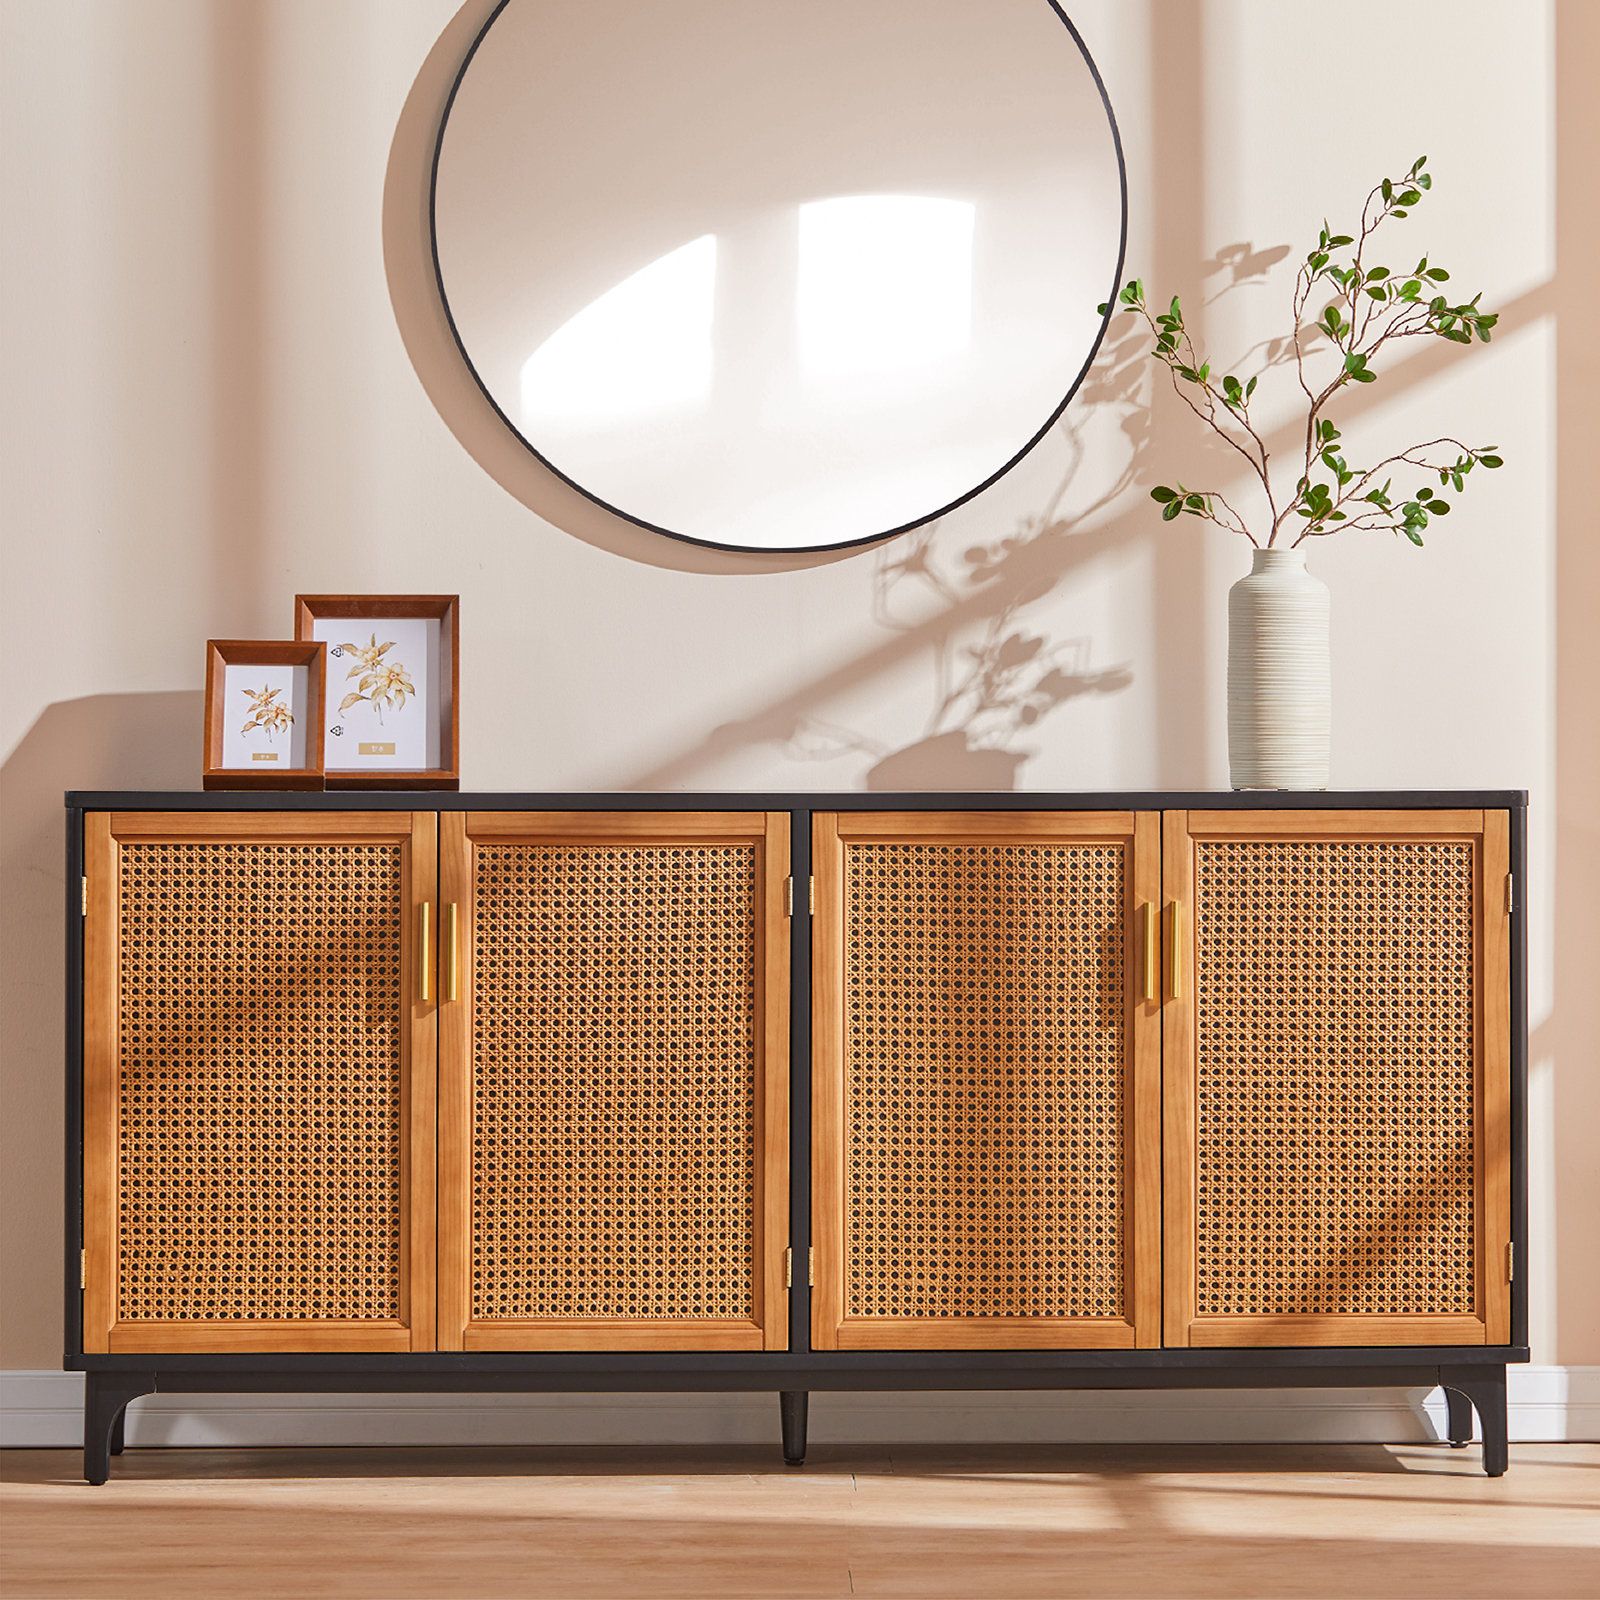 Bay Isle Home Hiawatha Sideboard Buffet Cabinet With Woven Rattan Doors And  Adjustable Shelf & Reviews | Wayfair Within Rattan Buffet Tables (View 4 of 20)